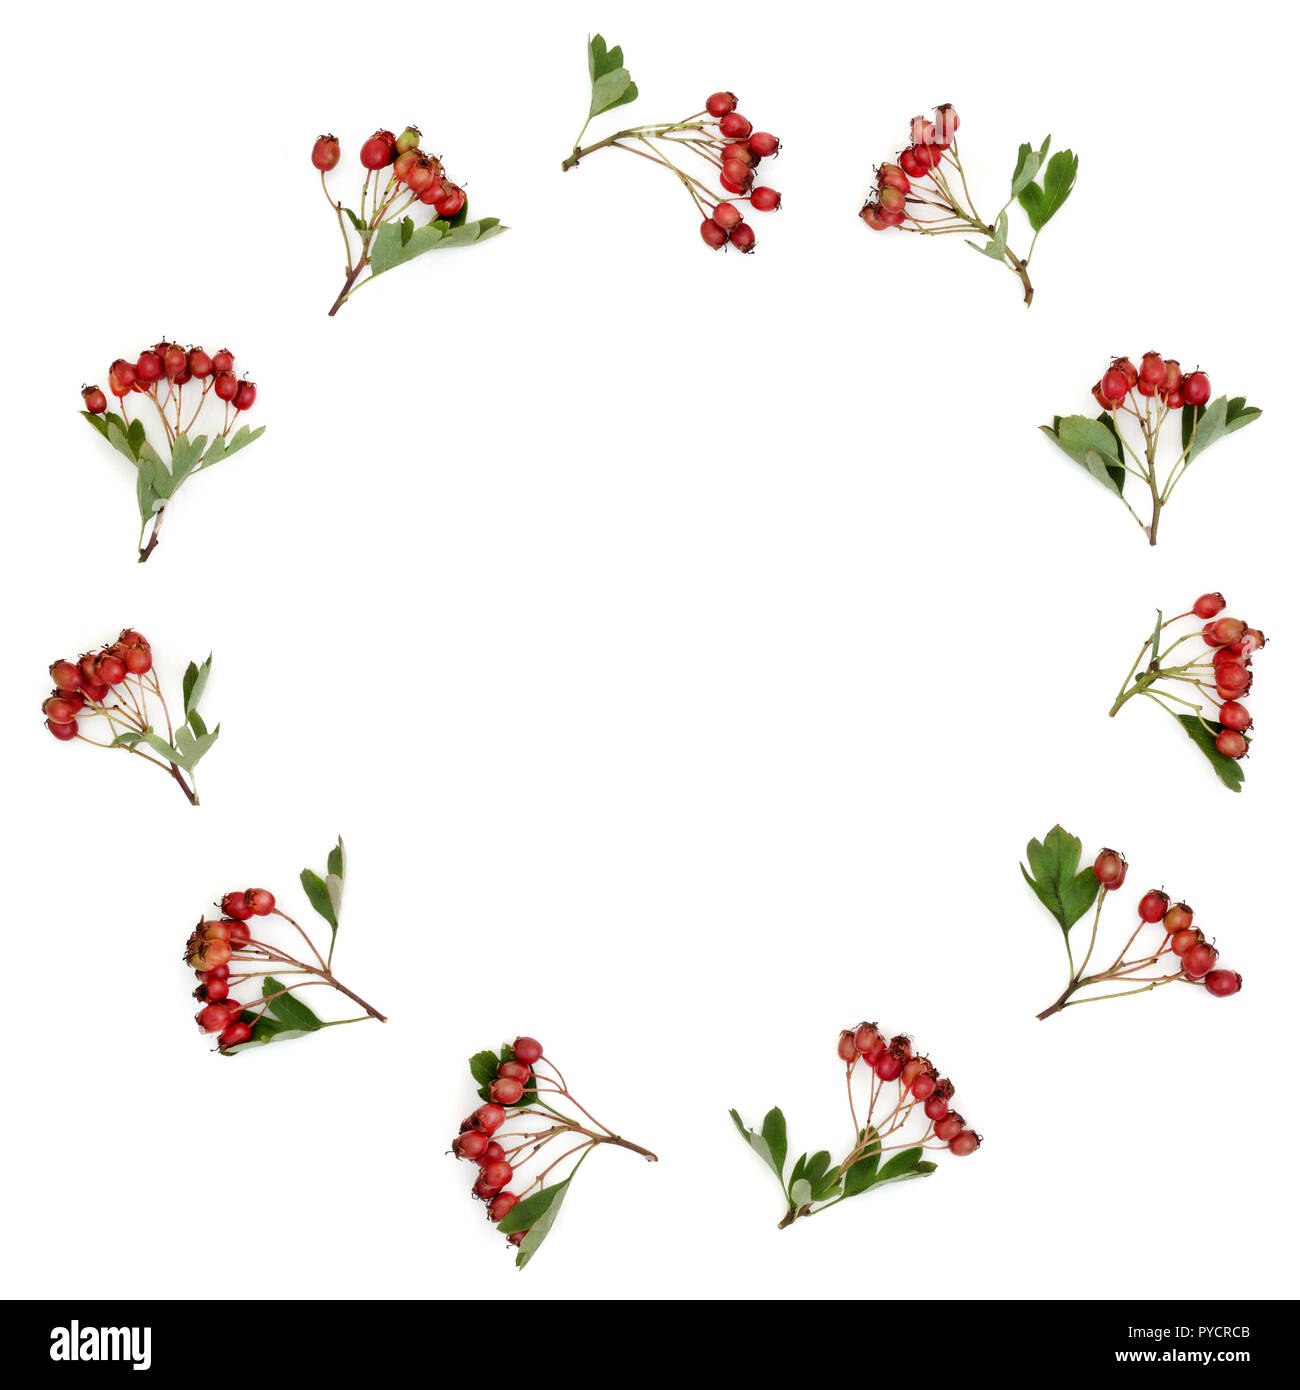 Hawthorn berry wreath on white background. Used in herbal medicine to lower blood pressure, improve circulation and help with cardiovascular problems. Stock Photo